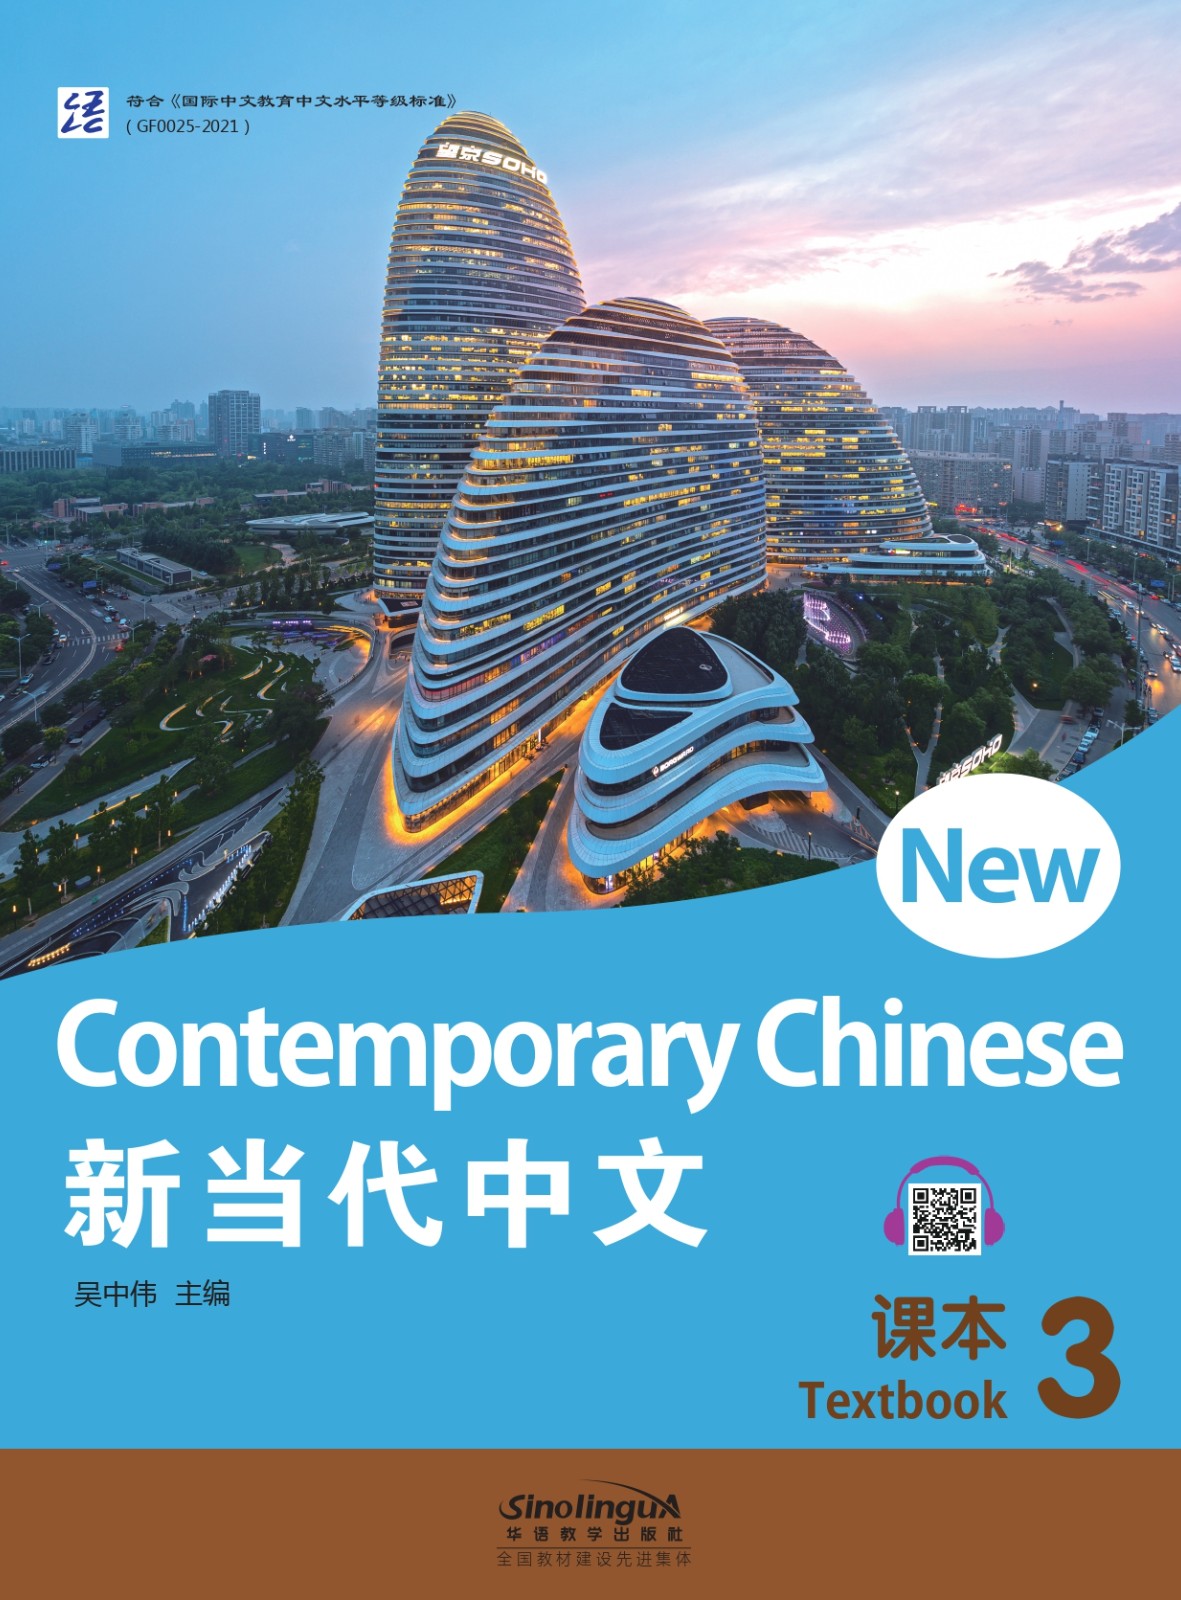 New Contemporary Chinese--Textbook 3